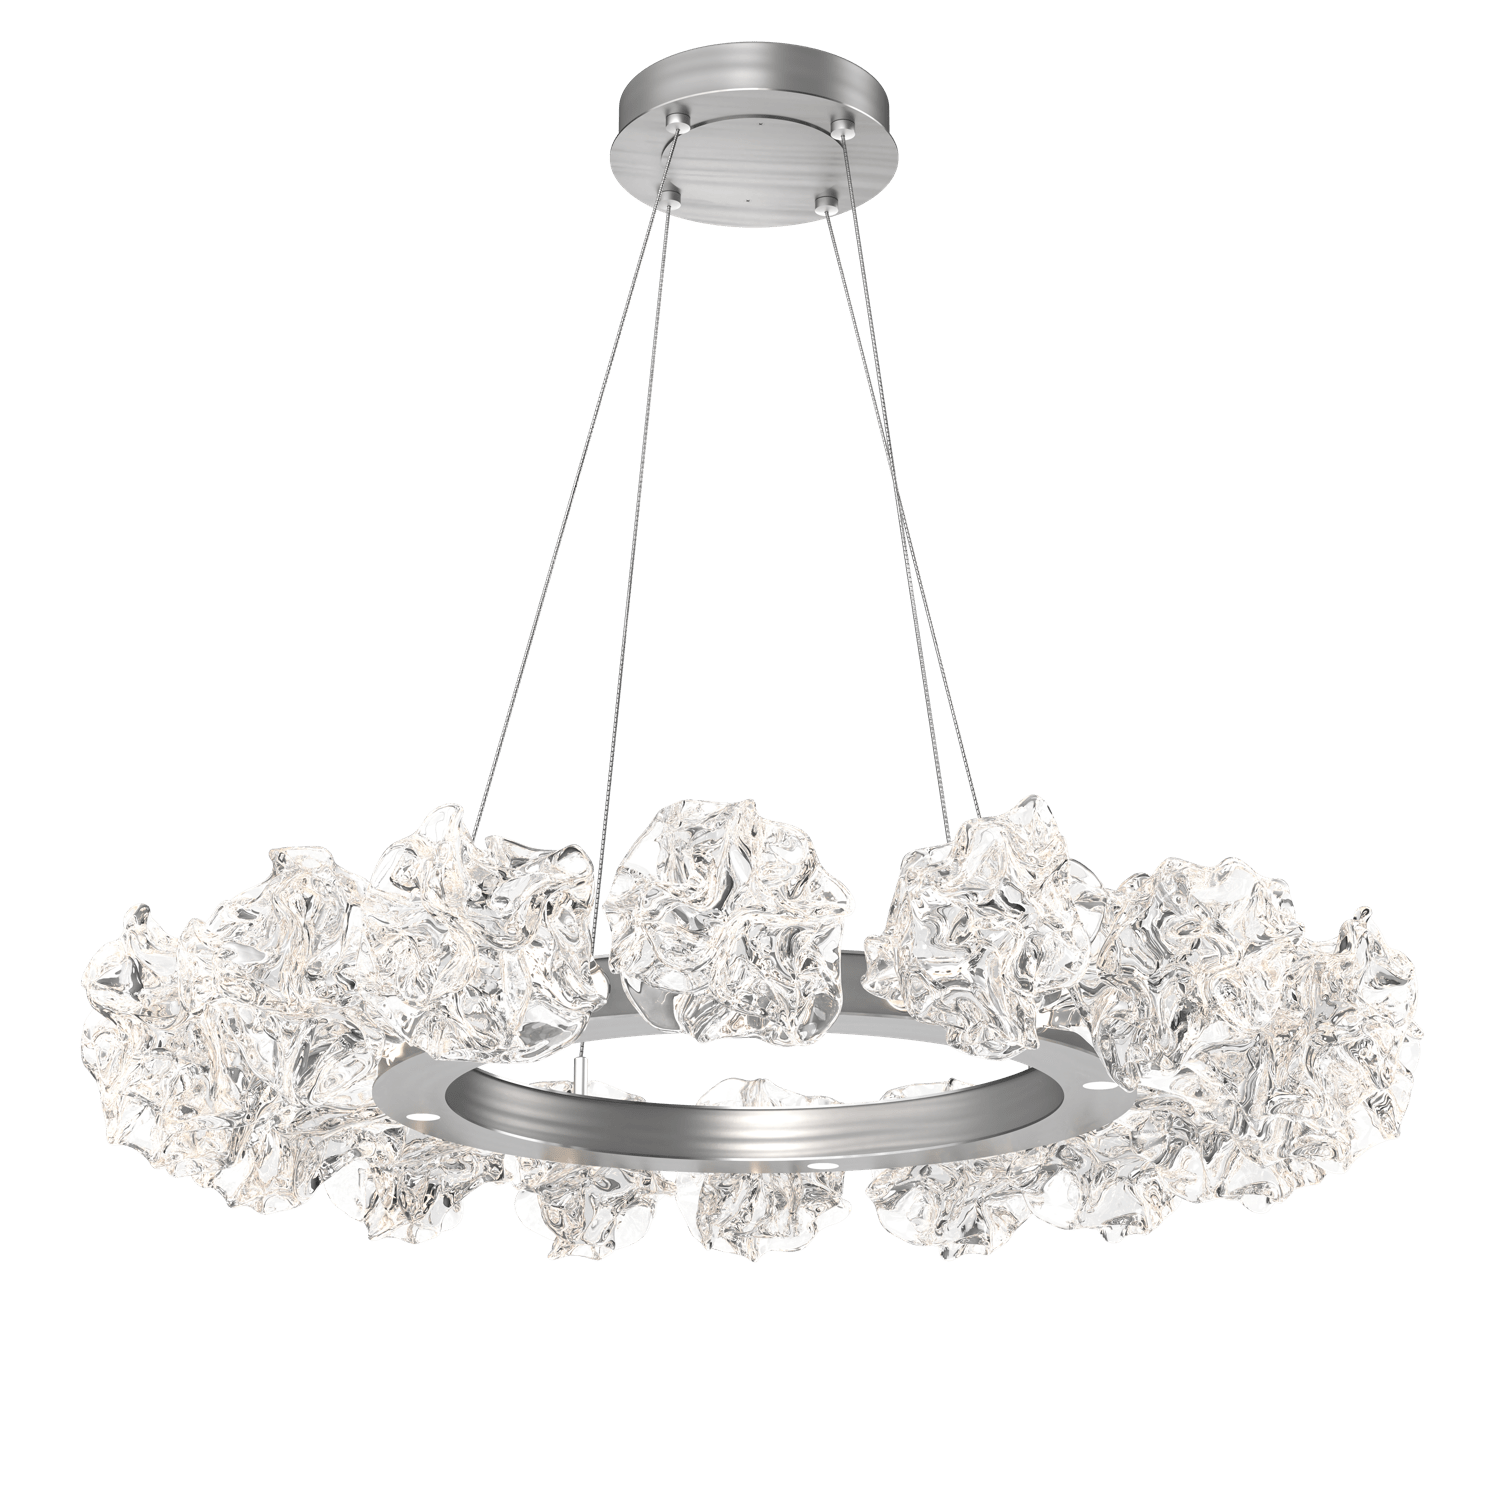 CHB0059-36-SN-Hammerton-Studio-Blossom-36-inch-radial-ring-chandelier-with-satin-nickel-finish-and-clear-handblown-crystal-glass-shades-and-LED-lamping